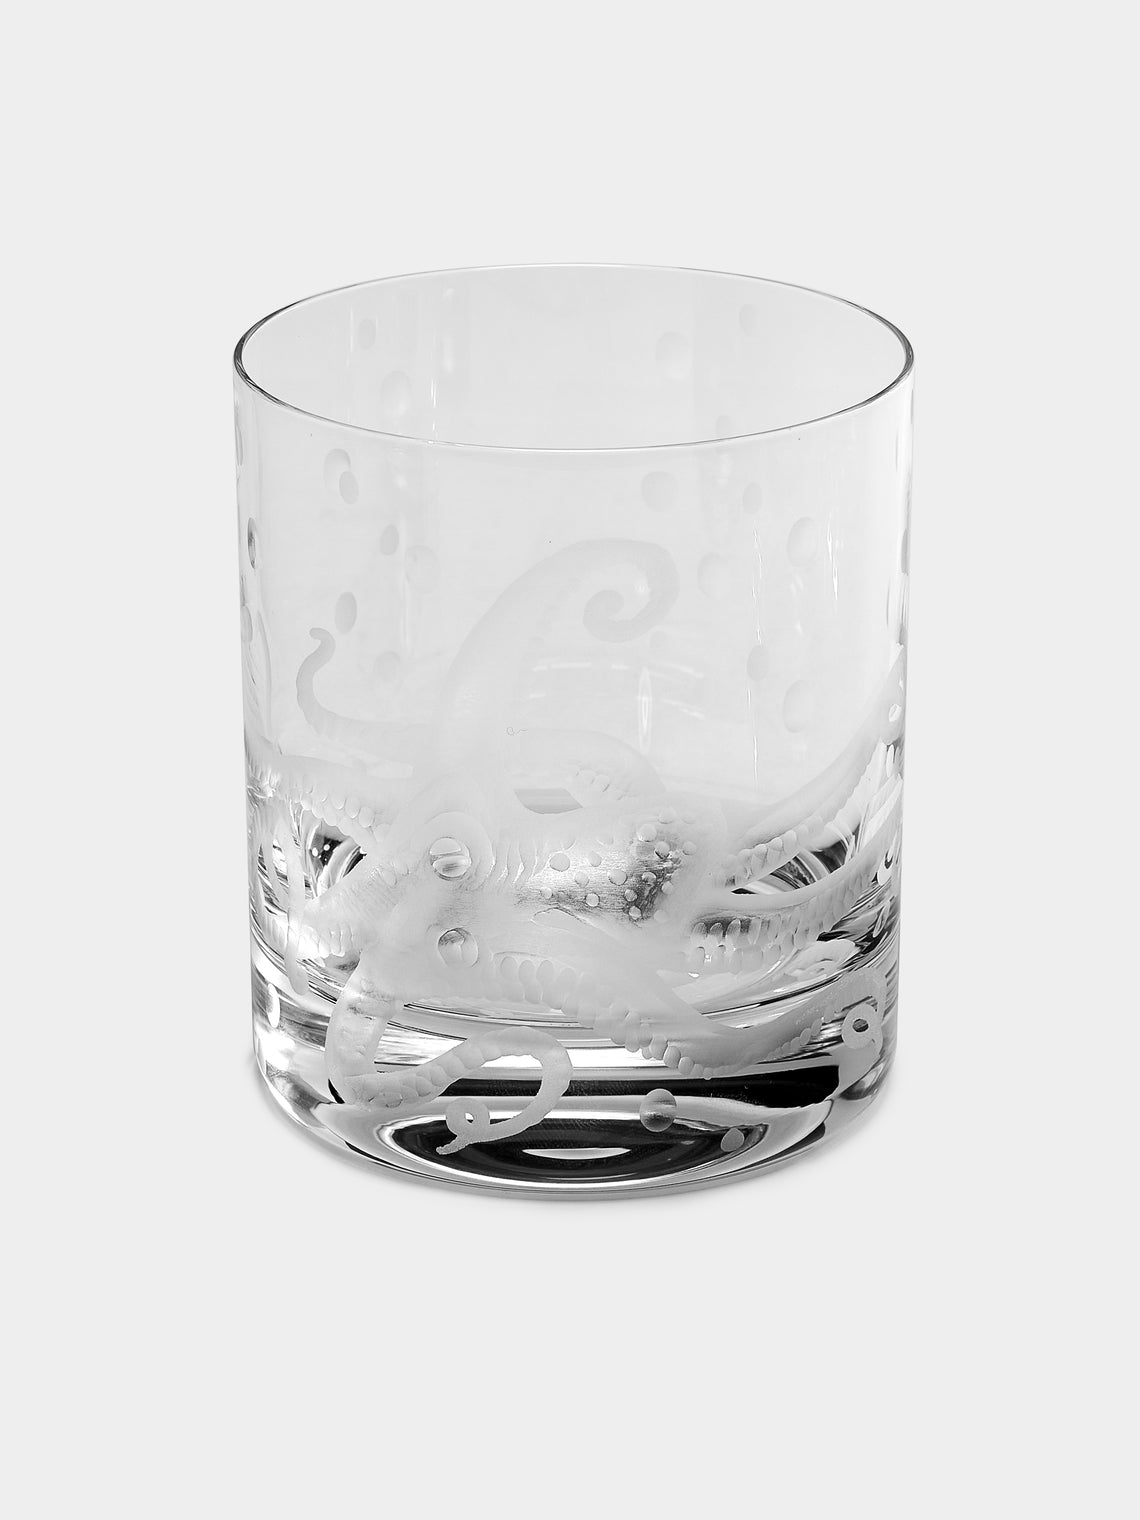 Artel - Sea Life Hand-Engraved Crystal Double Old Fashioned Glasses (Set of 6) -  - ABASK